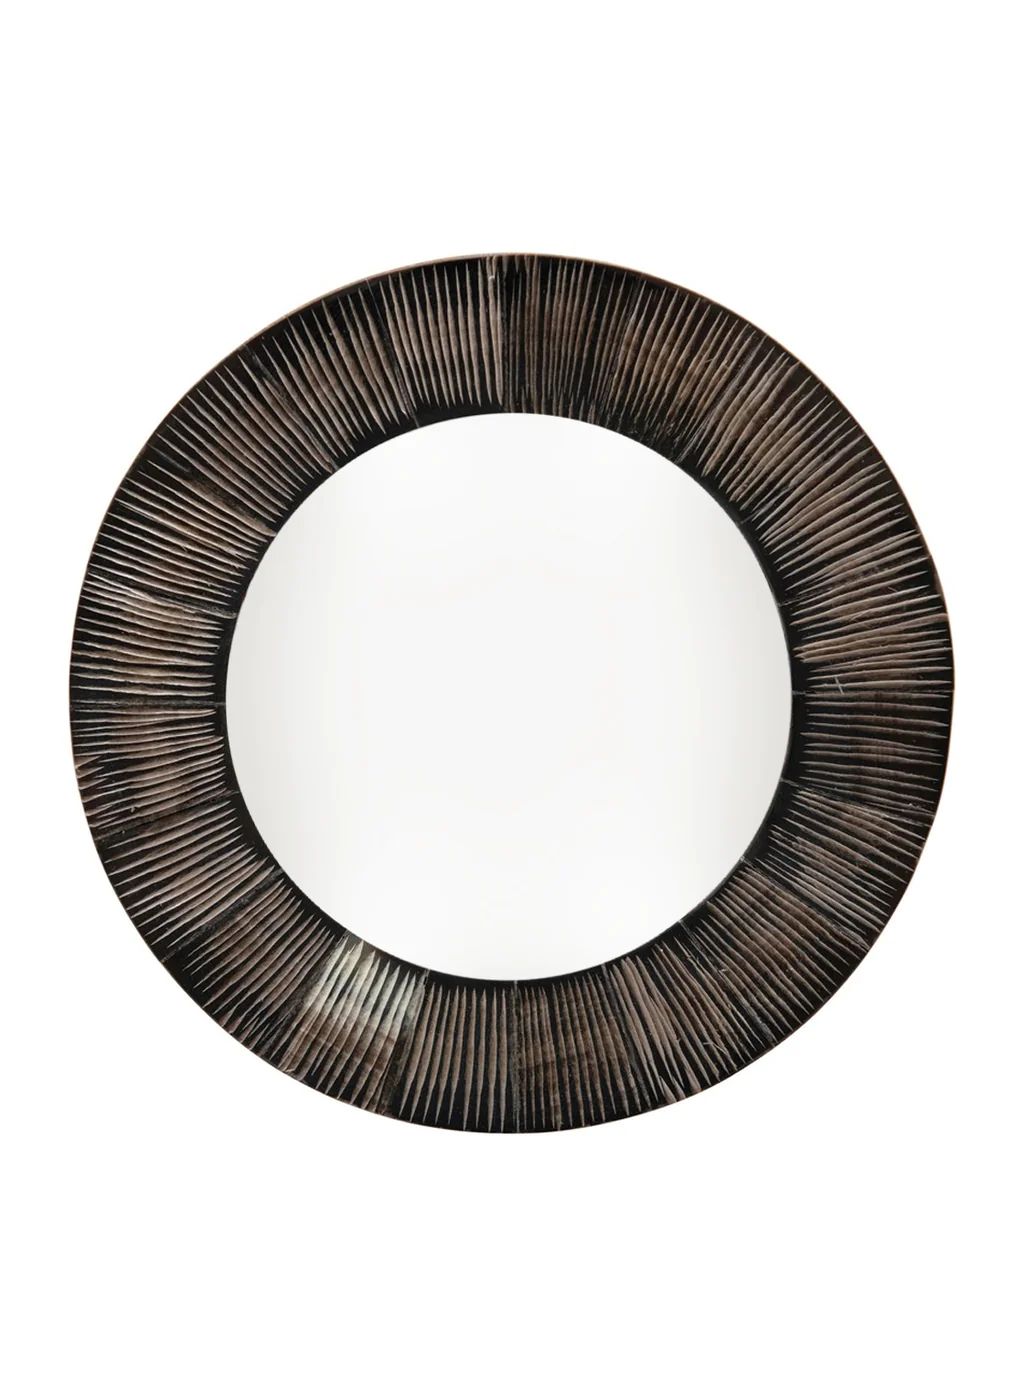 Horn Round Frame | House of Jade Home